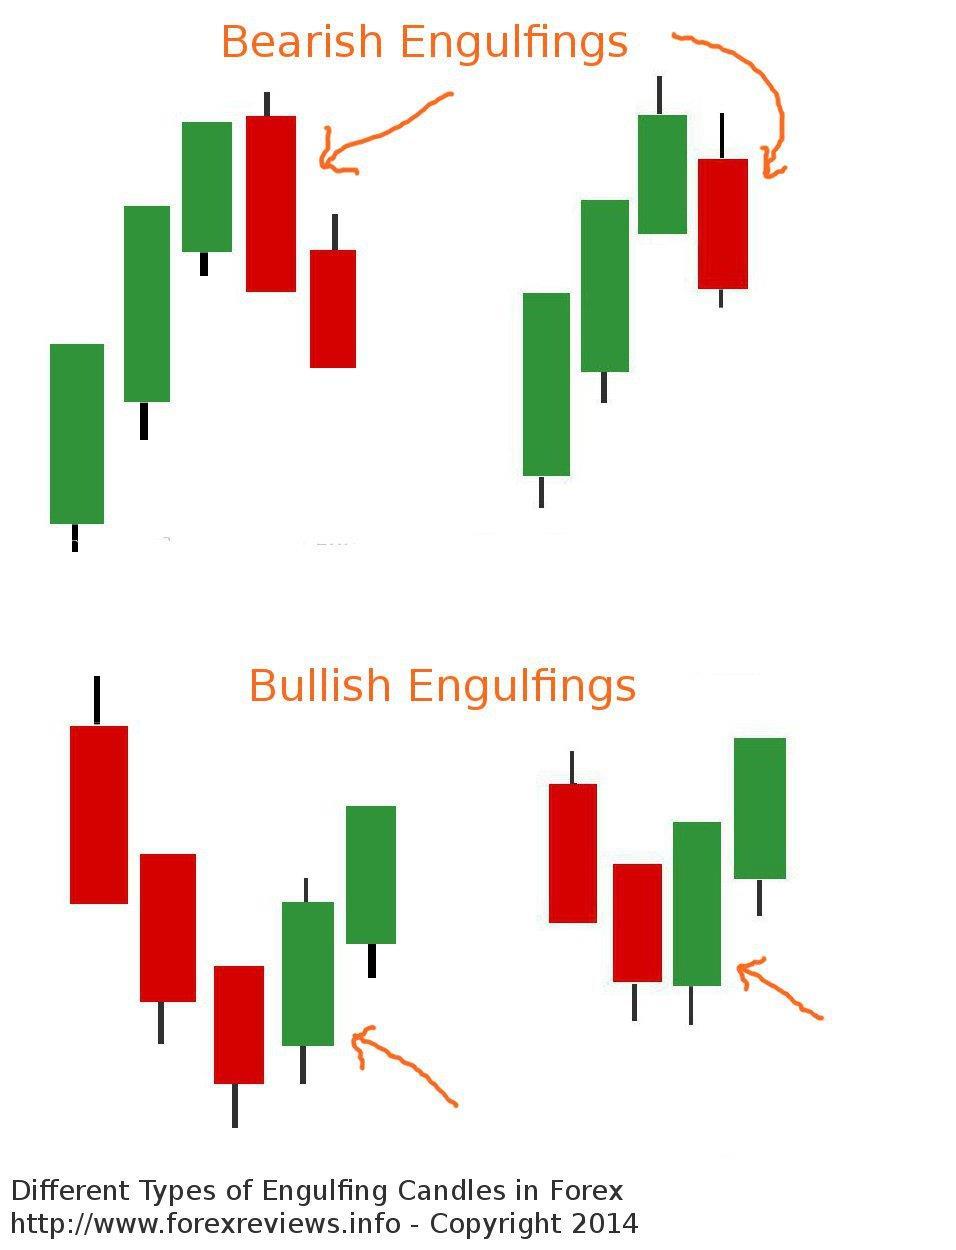 What is the Engulfing Candle? The engulfing candle is a candle that is bigger than the previous candles to the left.